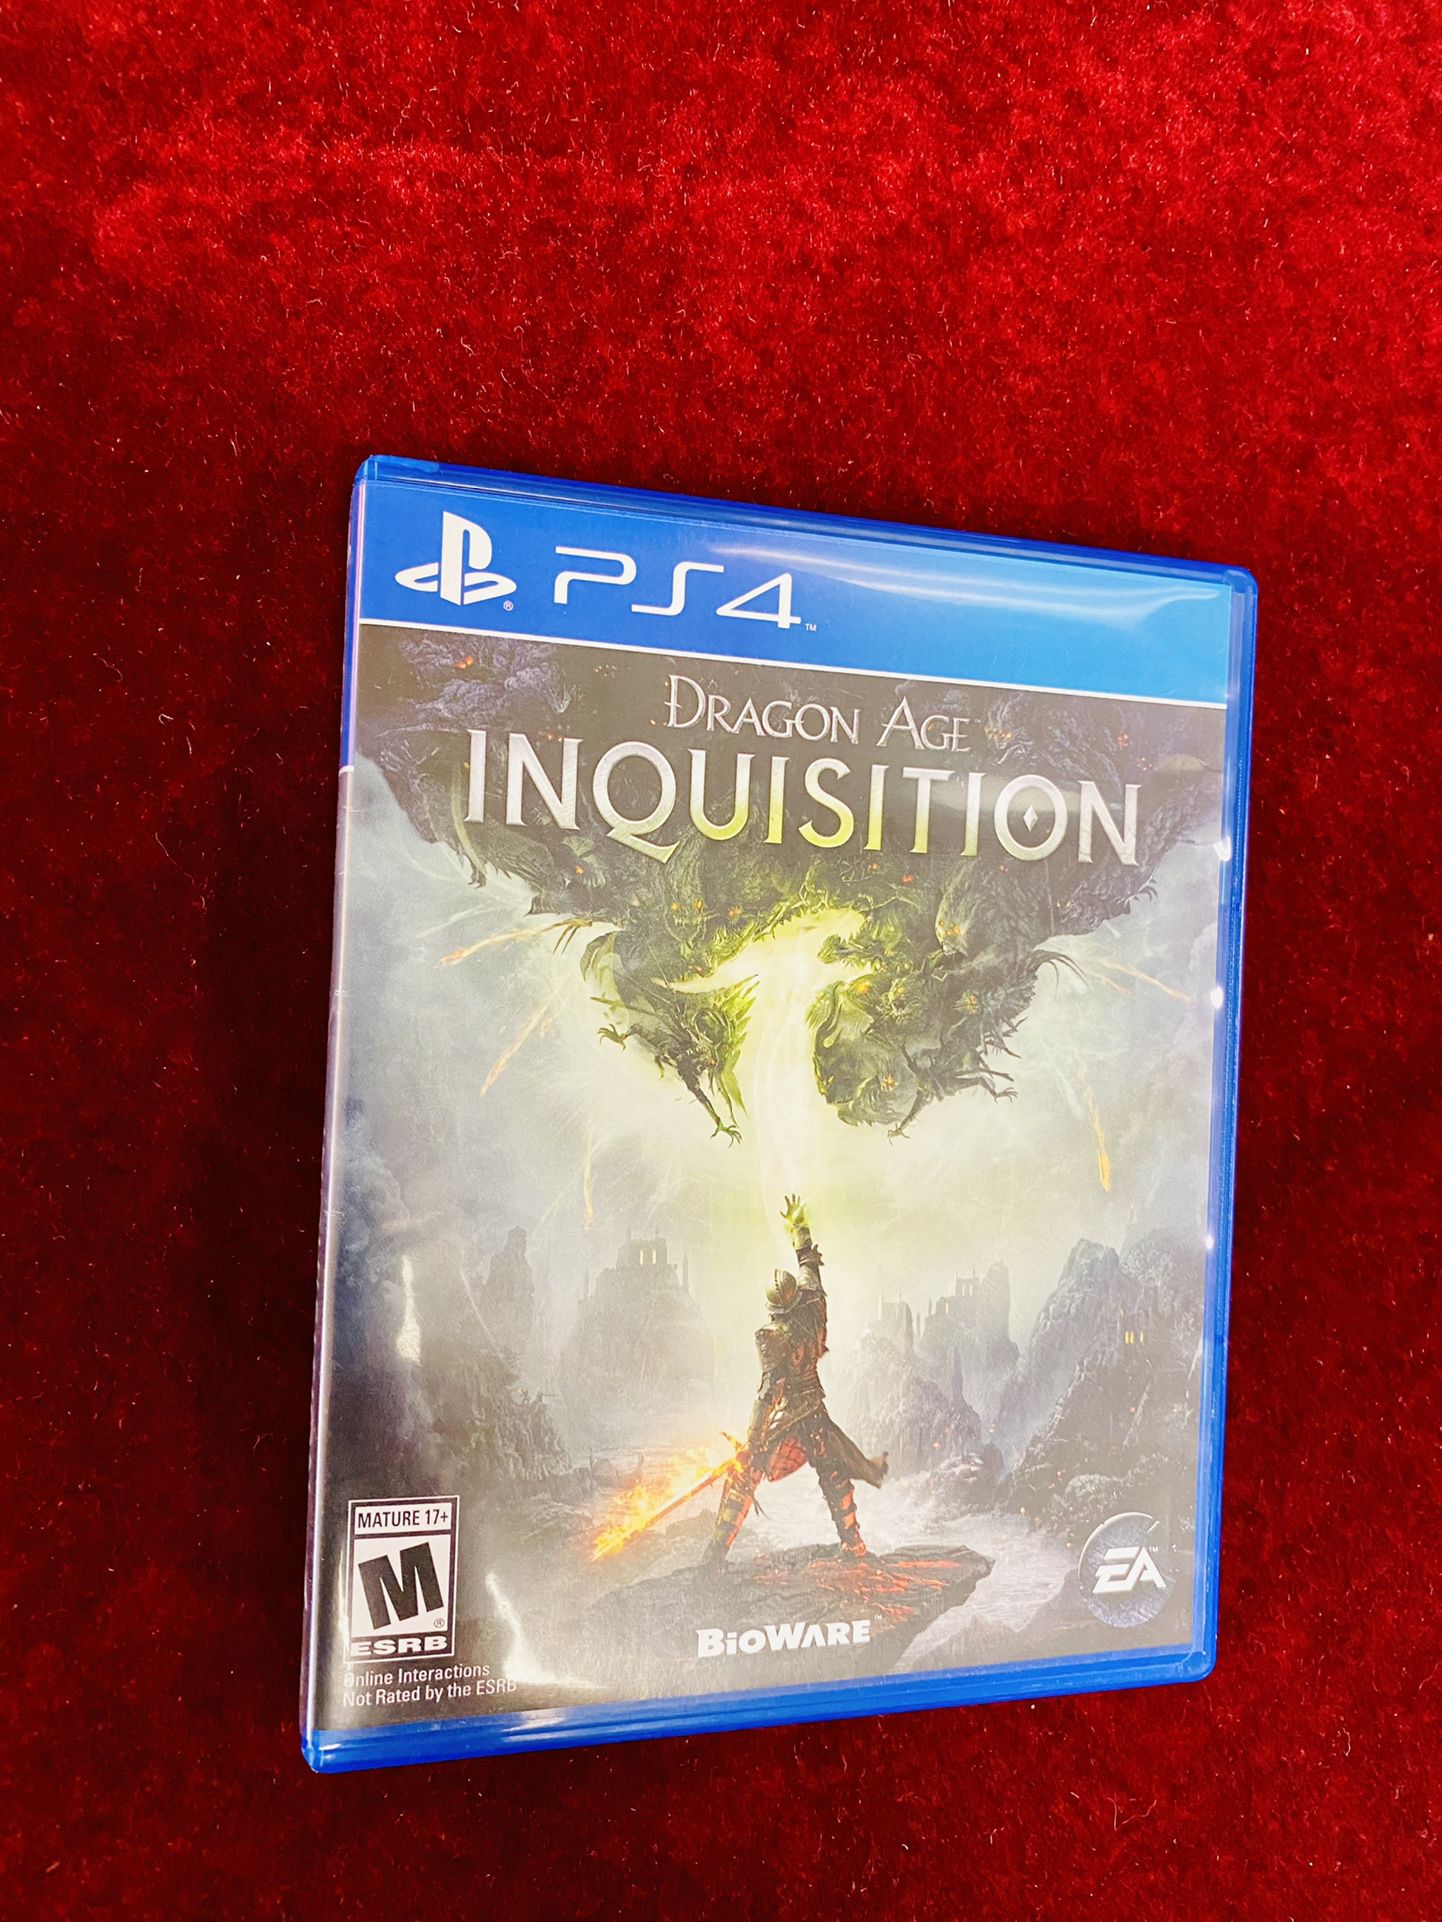 PS4 Dragon Age Inquisition Game